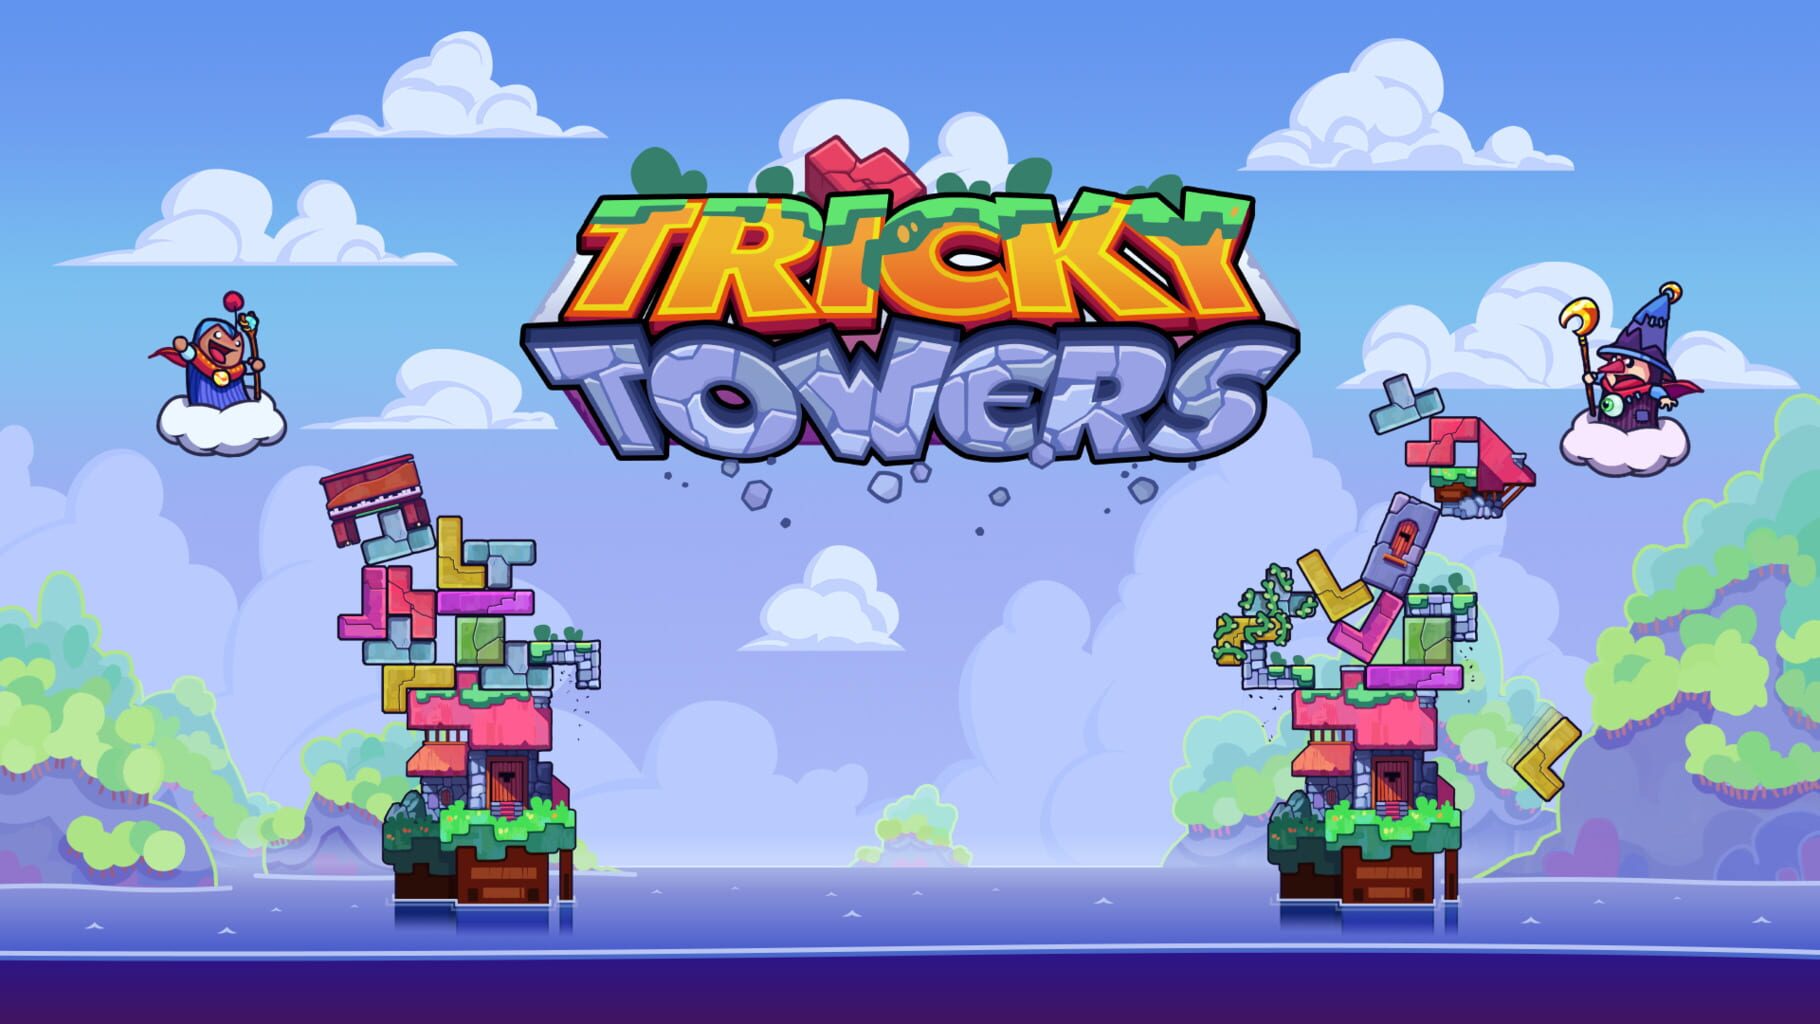 Artwork for Tricky Towers